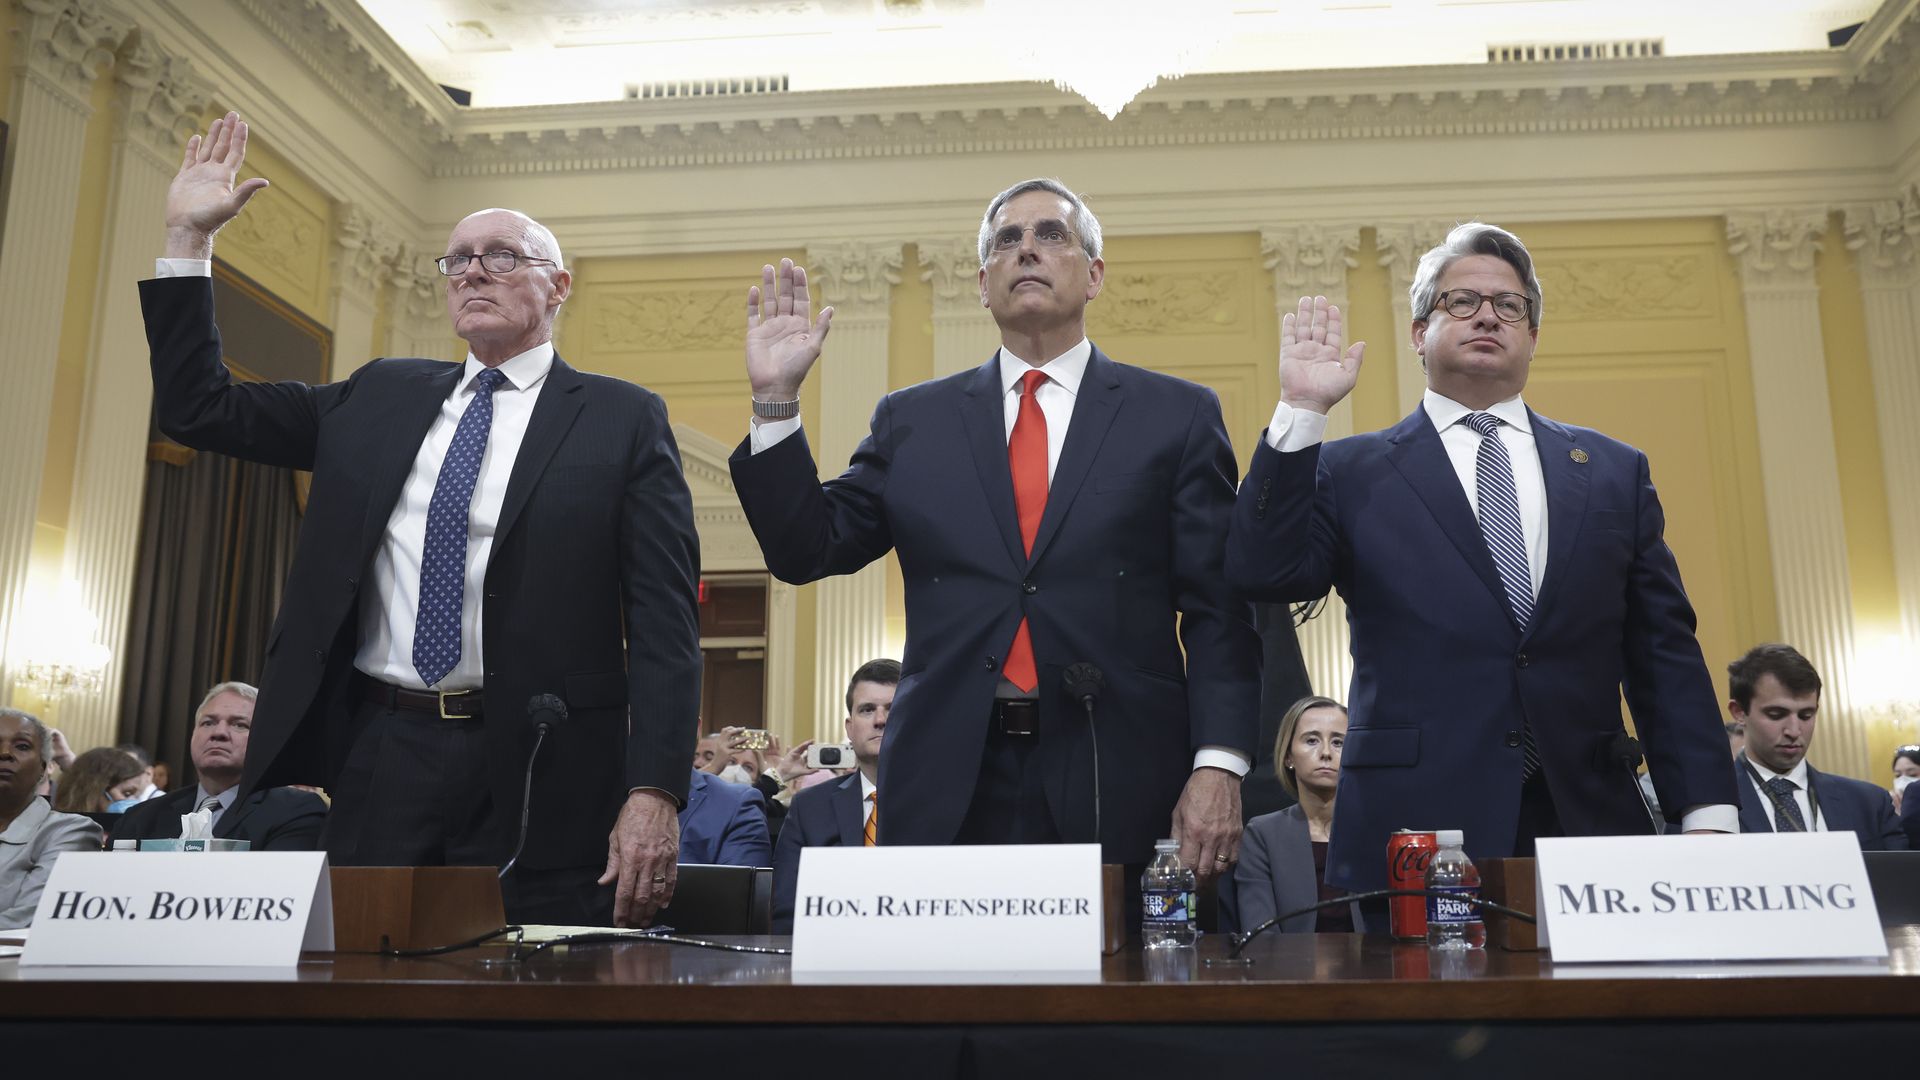 Three men holding their right hands up swearing to tell the truth